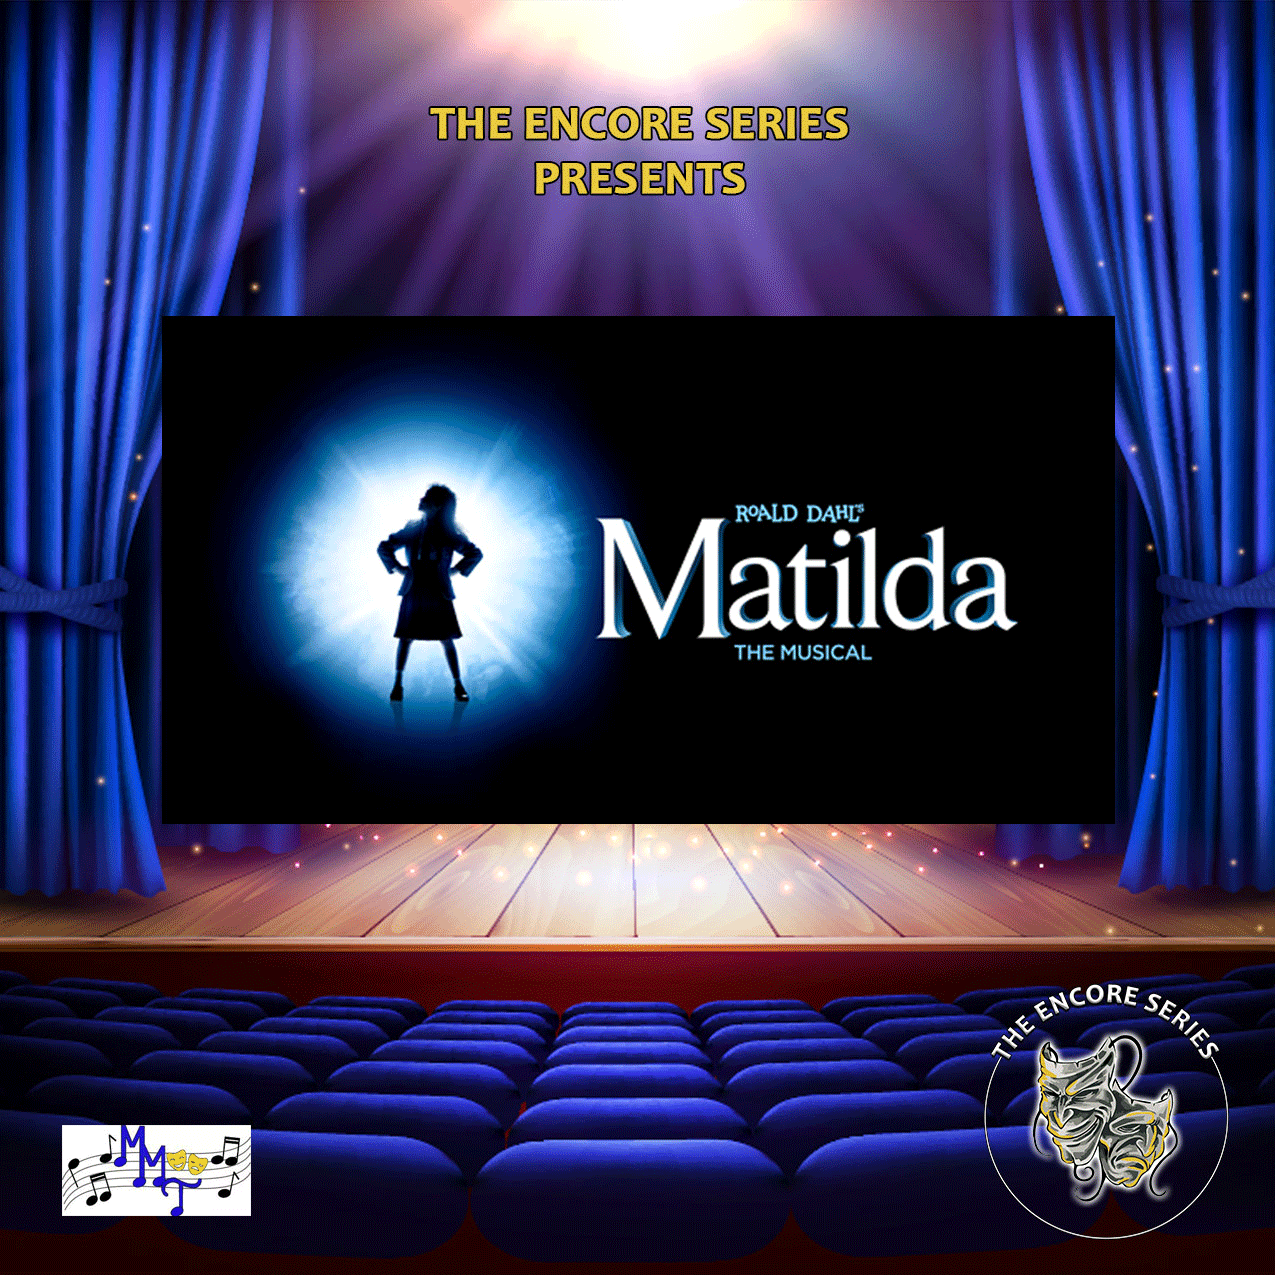 Matilda show logo on a stage with blue curtains